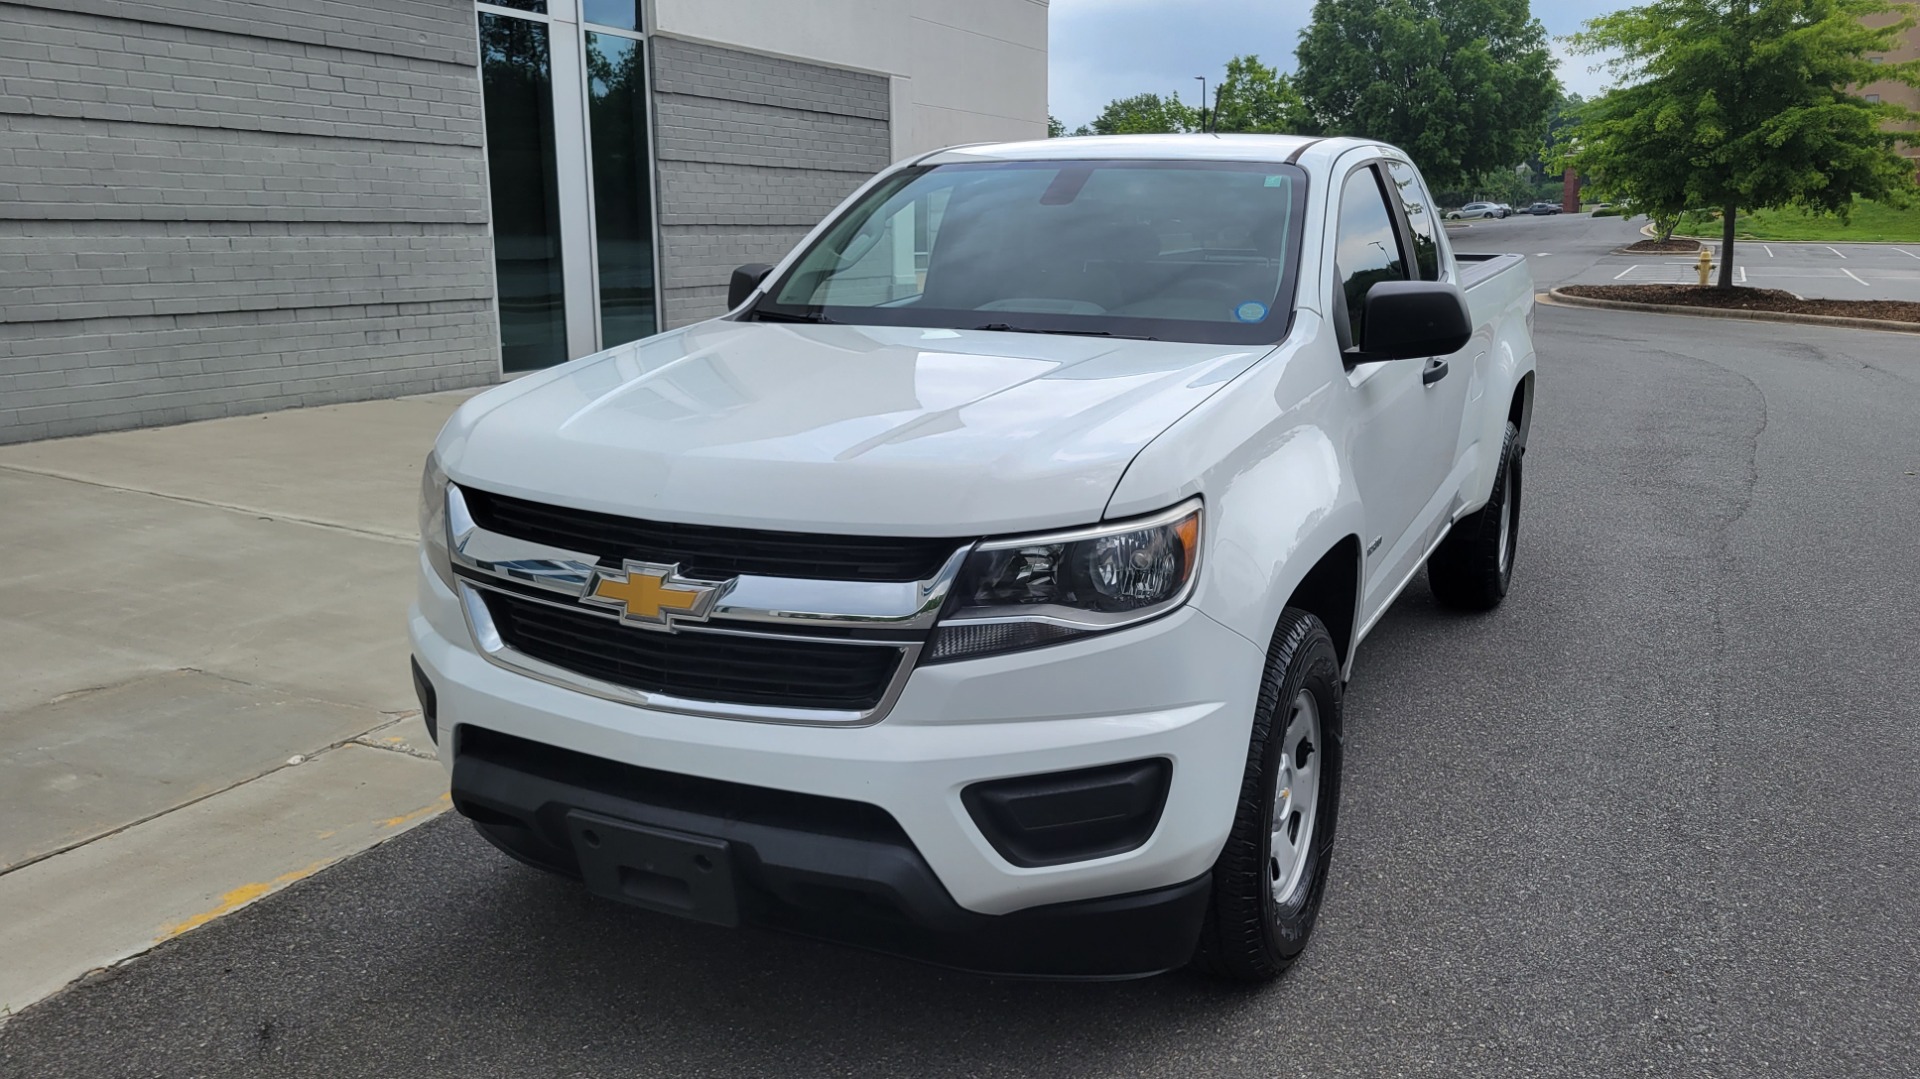 Used 2018 Chevrolet COLORADO EXT CAB / 2.5L / 2WD / 6-SPD AUTO / WORK TRUCK / REARVIEW for sale $22,495 at Formula Imports in Charlotte NC 28227 3